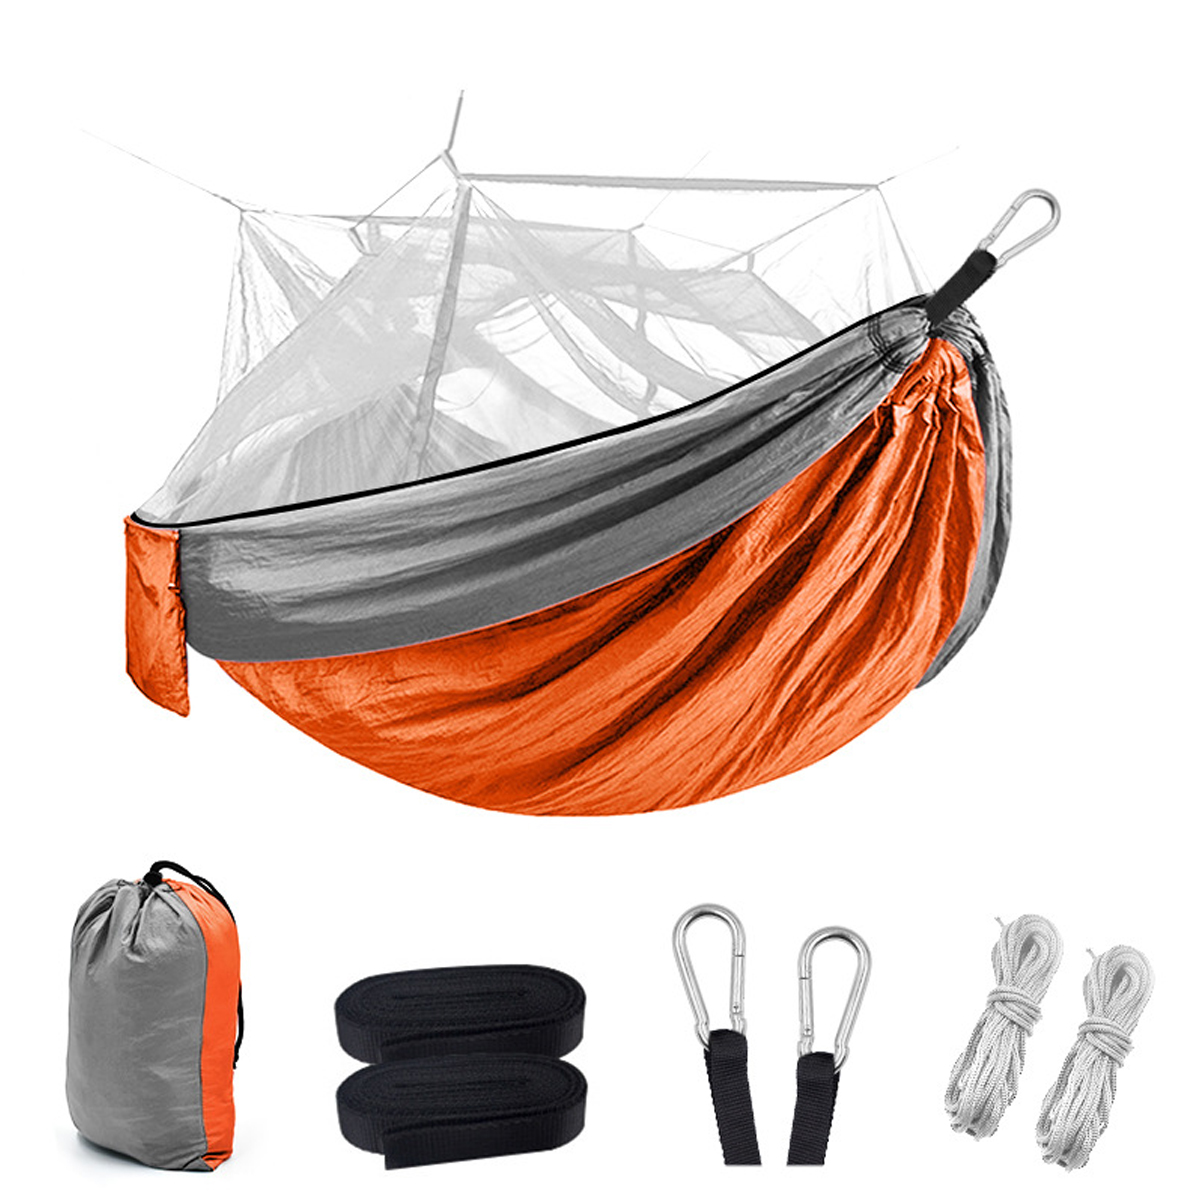 1-2-Person-Camping-Hammock-with-Mosquito-Net-Hanging-Bed-Sleeping-Swing-for-Outdoor-Hiking-Travel-Ga-1803189-2